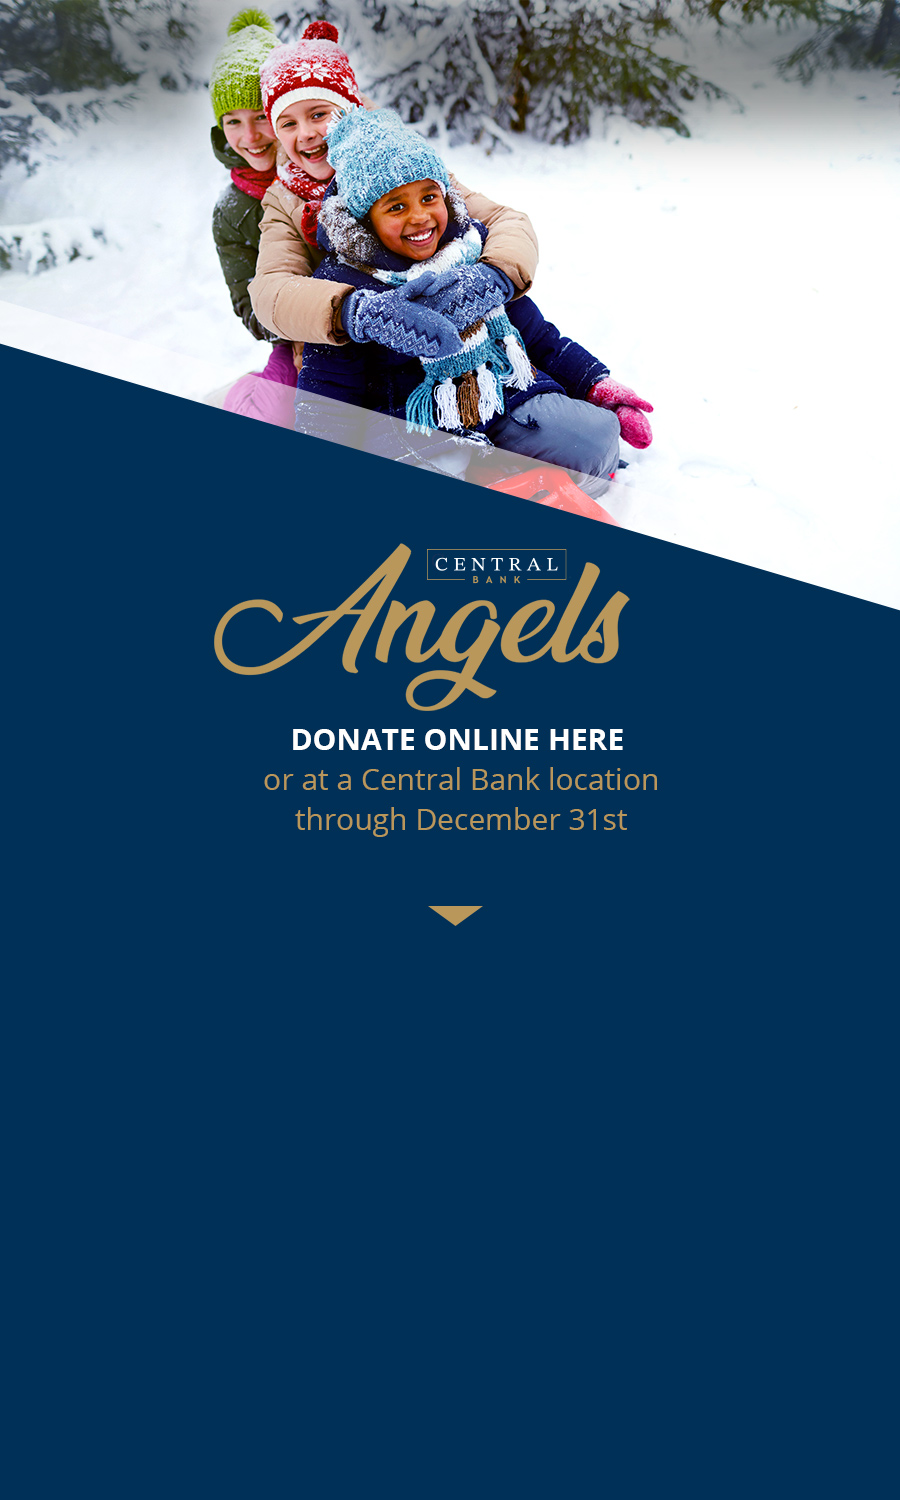 Central Bank Angels - Donate to help people in our communities.